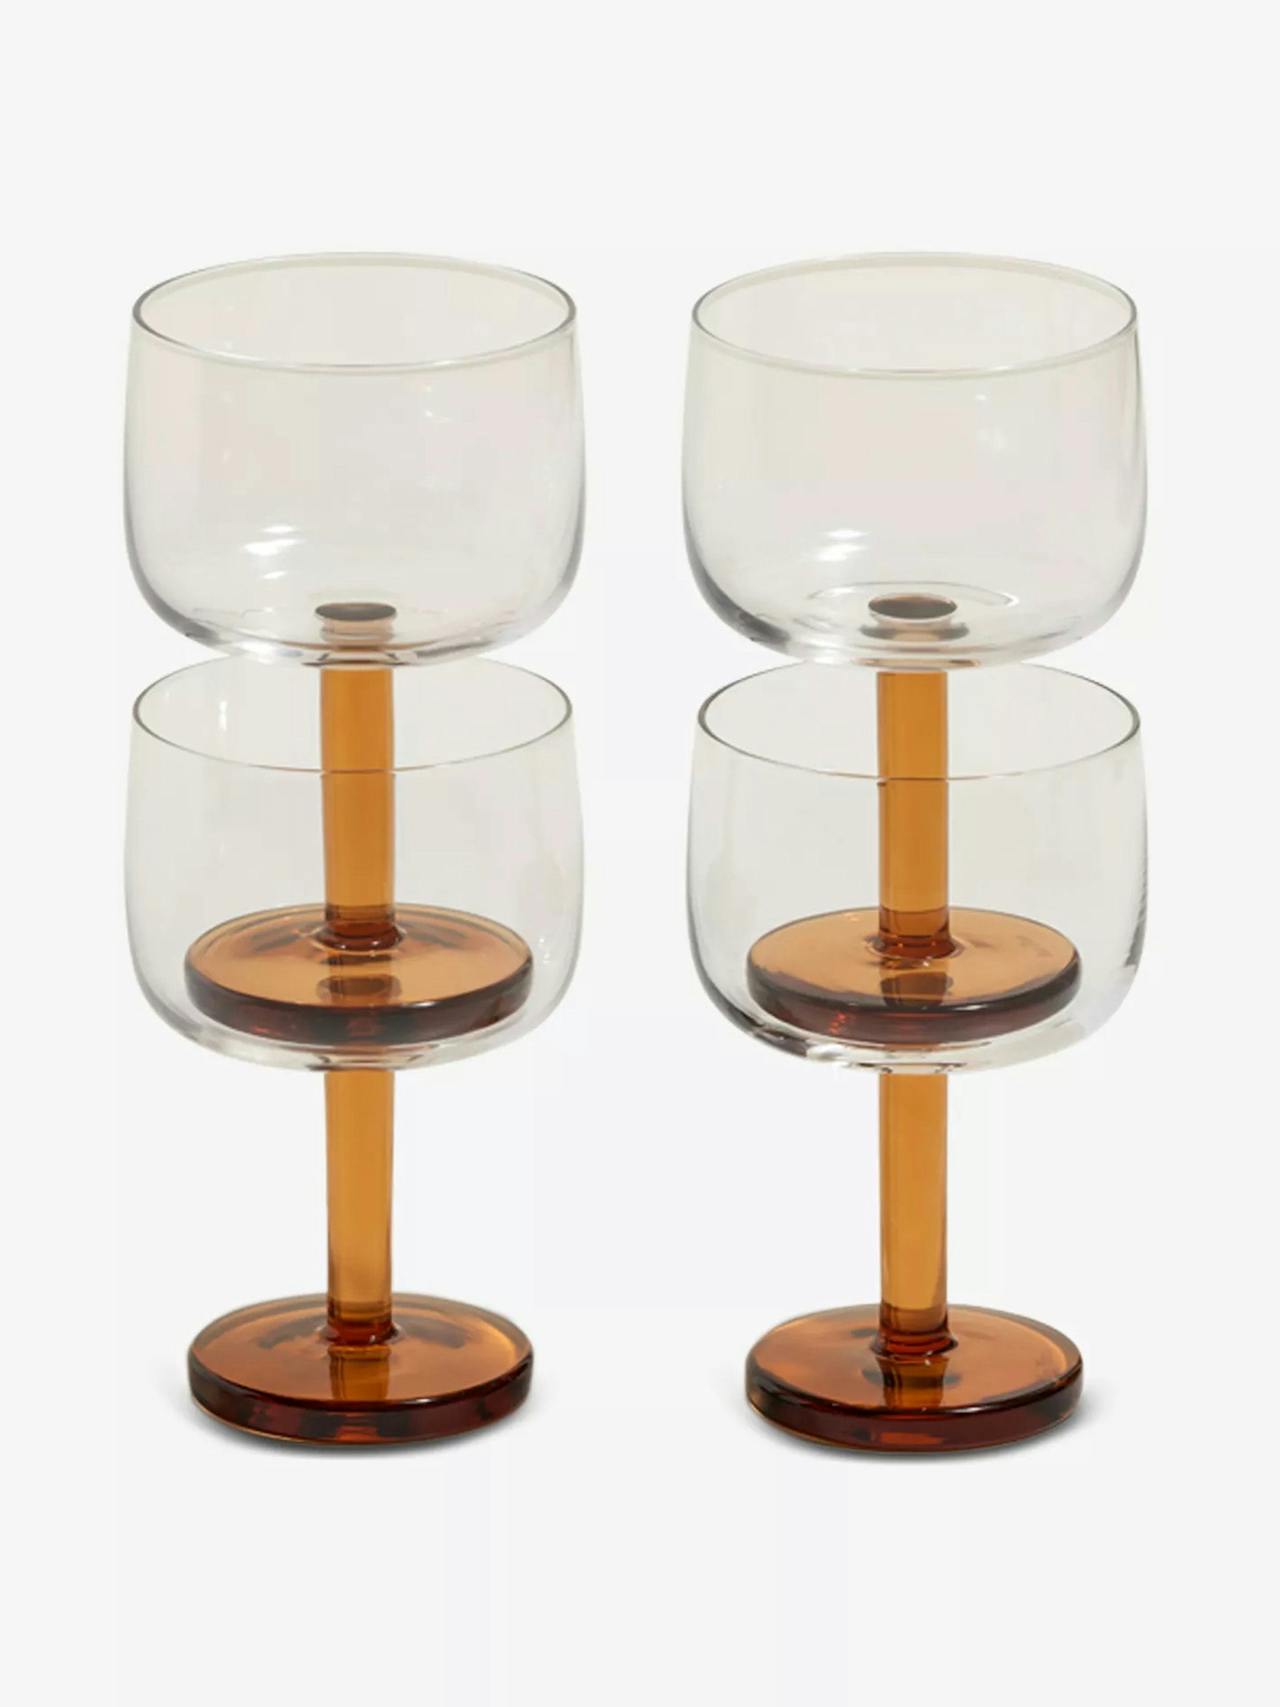 Party coupe glasses (set of 4)